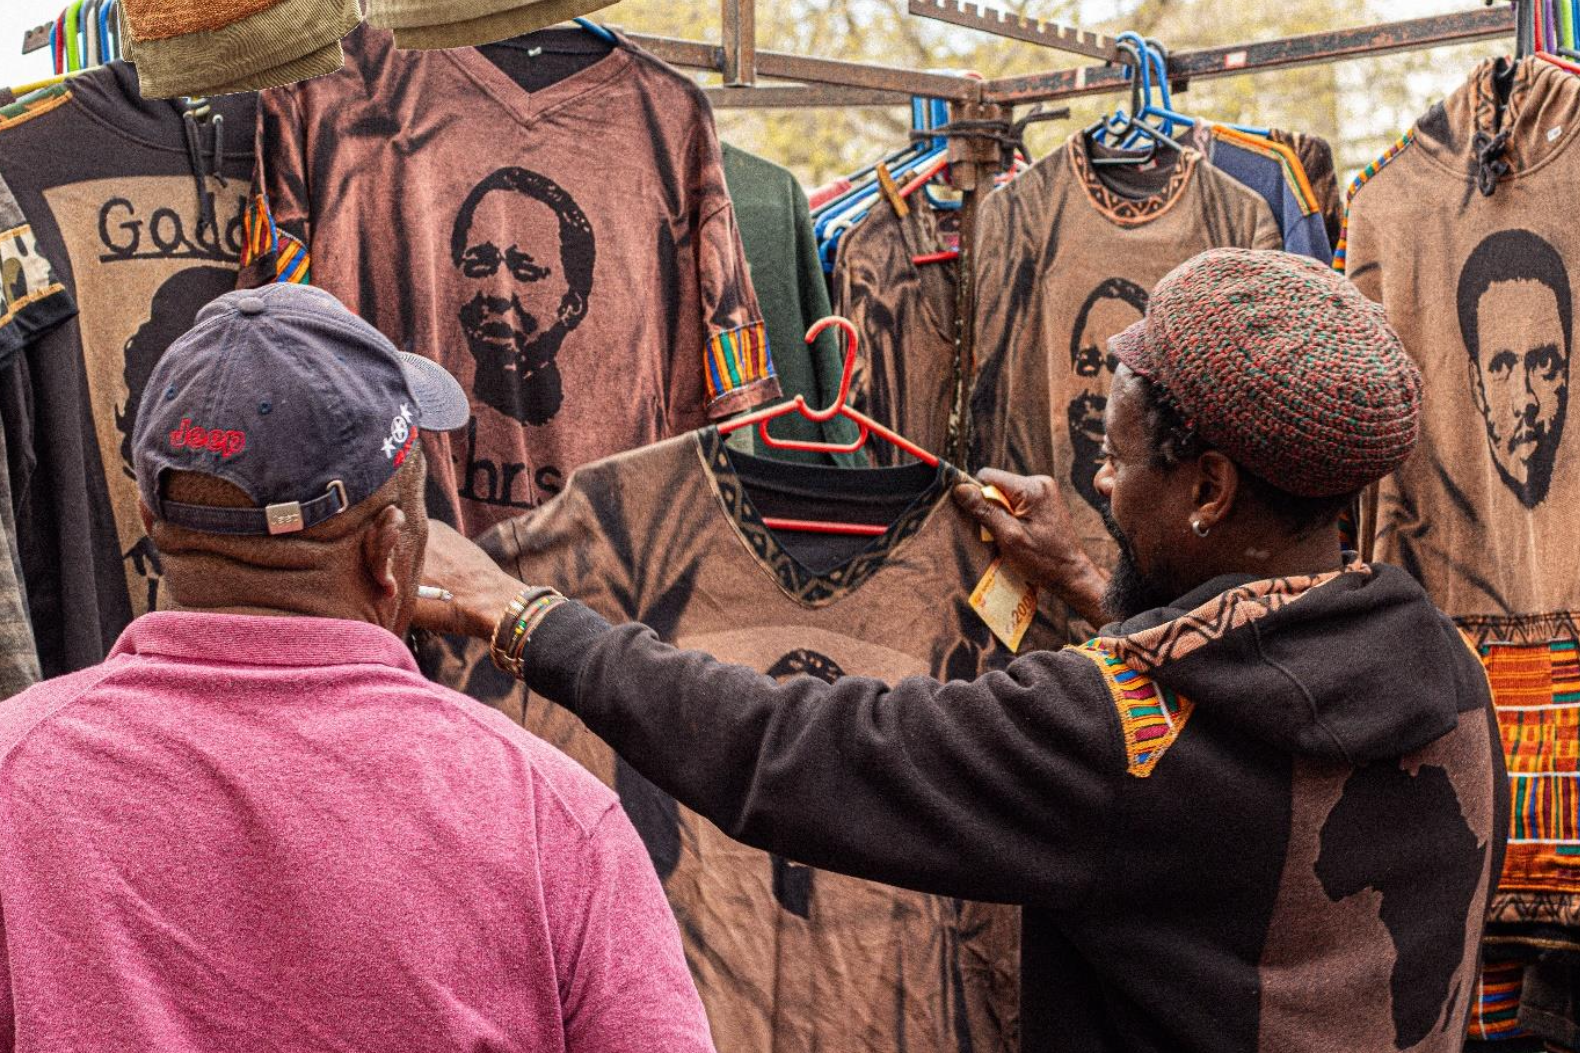 An eager tourist makes a purchase at Isaias’ clothing stall on High Street in the CBD of Makhanda. Photo: Siqhamo Jama